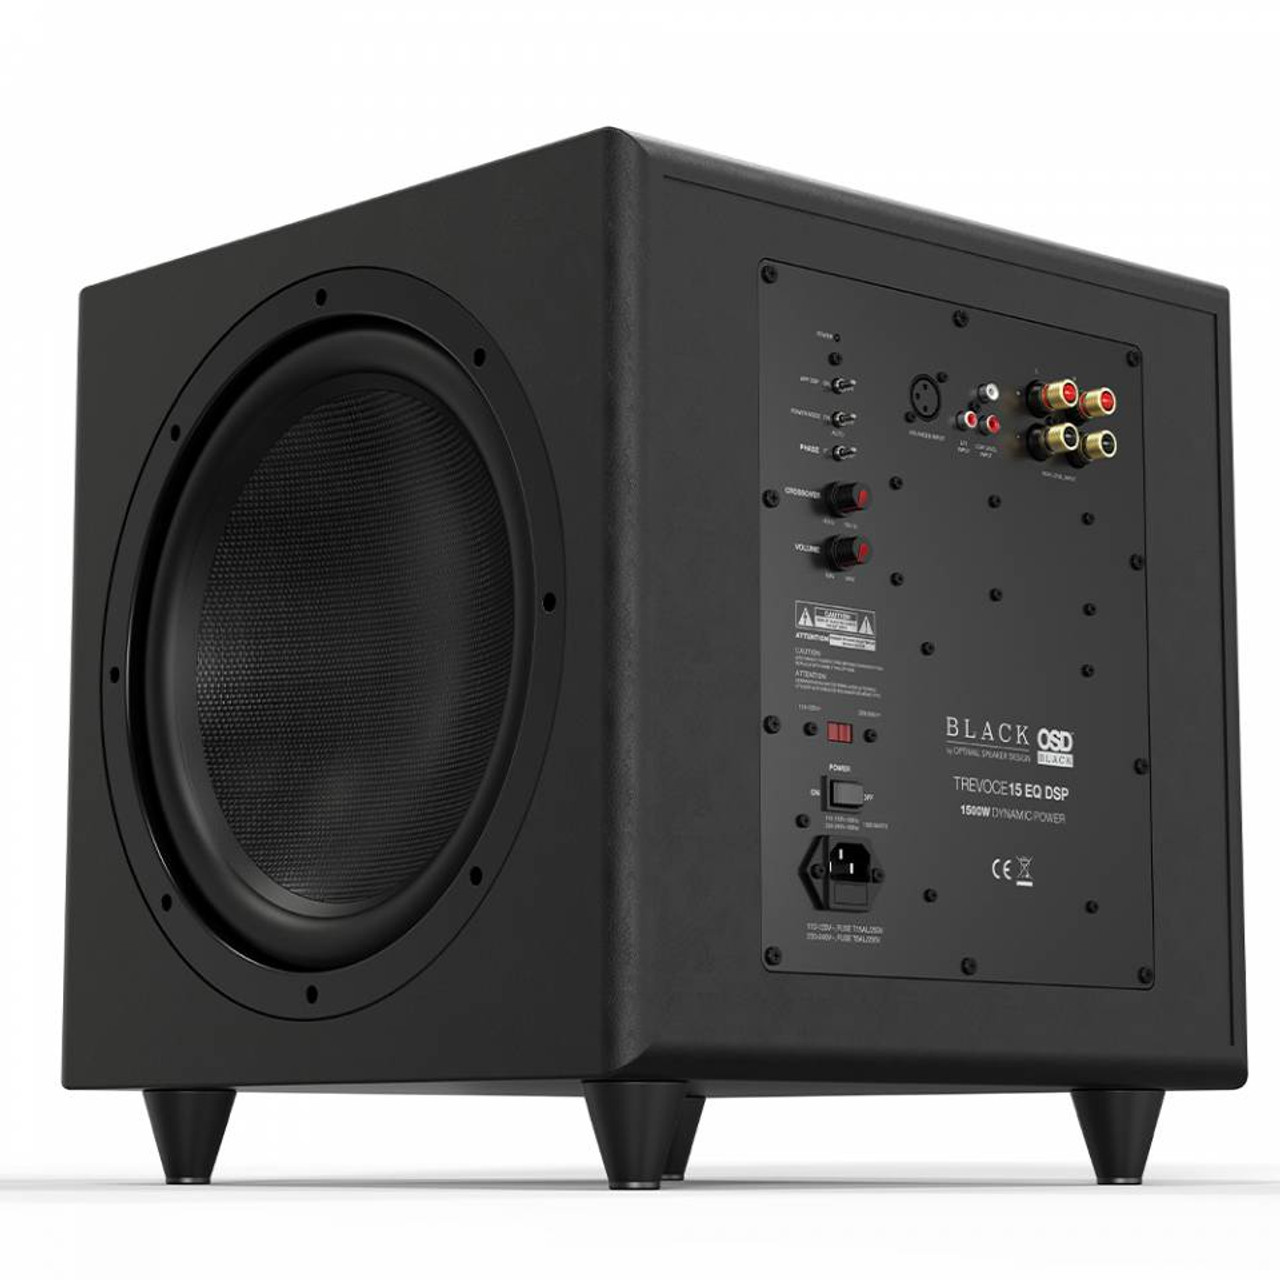 OSD Black TreVoce15 DSP 15" 1500W Dynamic Powered Subwoofer With Dual Passive Radiator